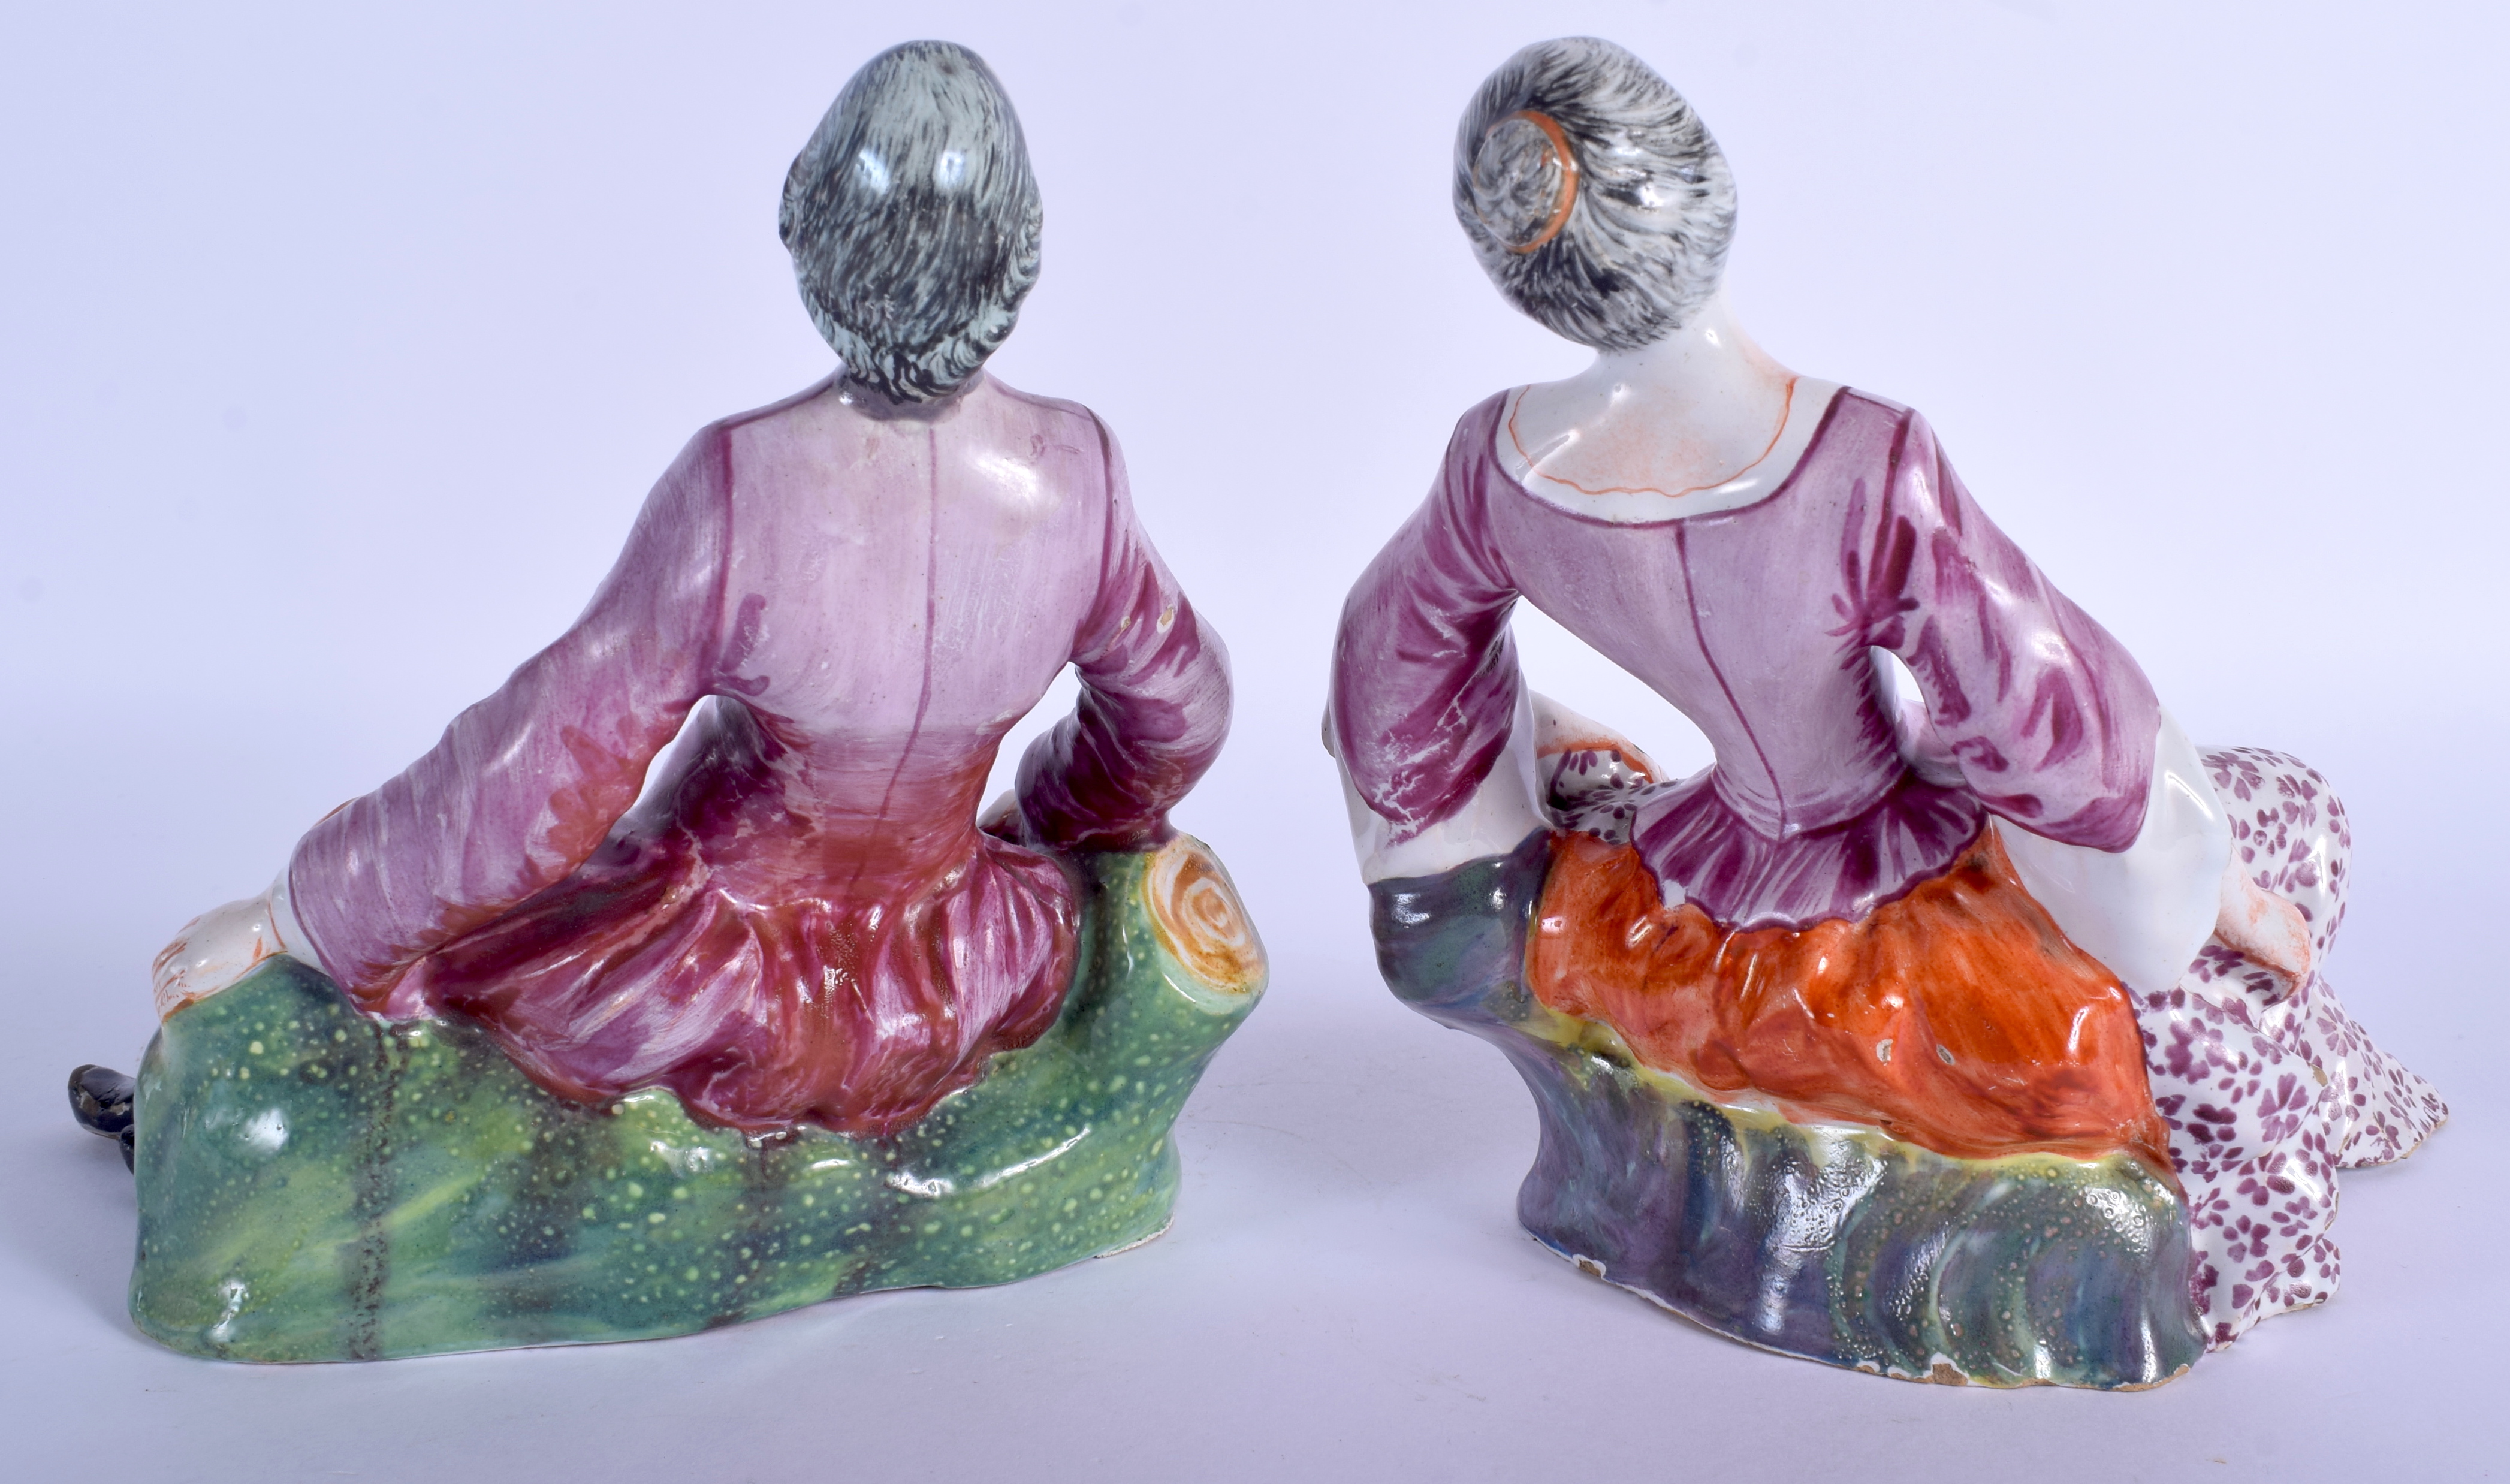 A PAIR OF 18TH CENTURY DUTCH DELFT FIGURES OF A MALE AND FEMALE C1750 modelled resting upon outcrop - Image 2 of 3